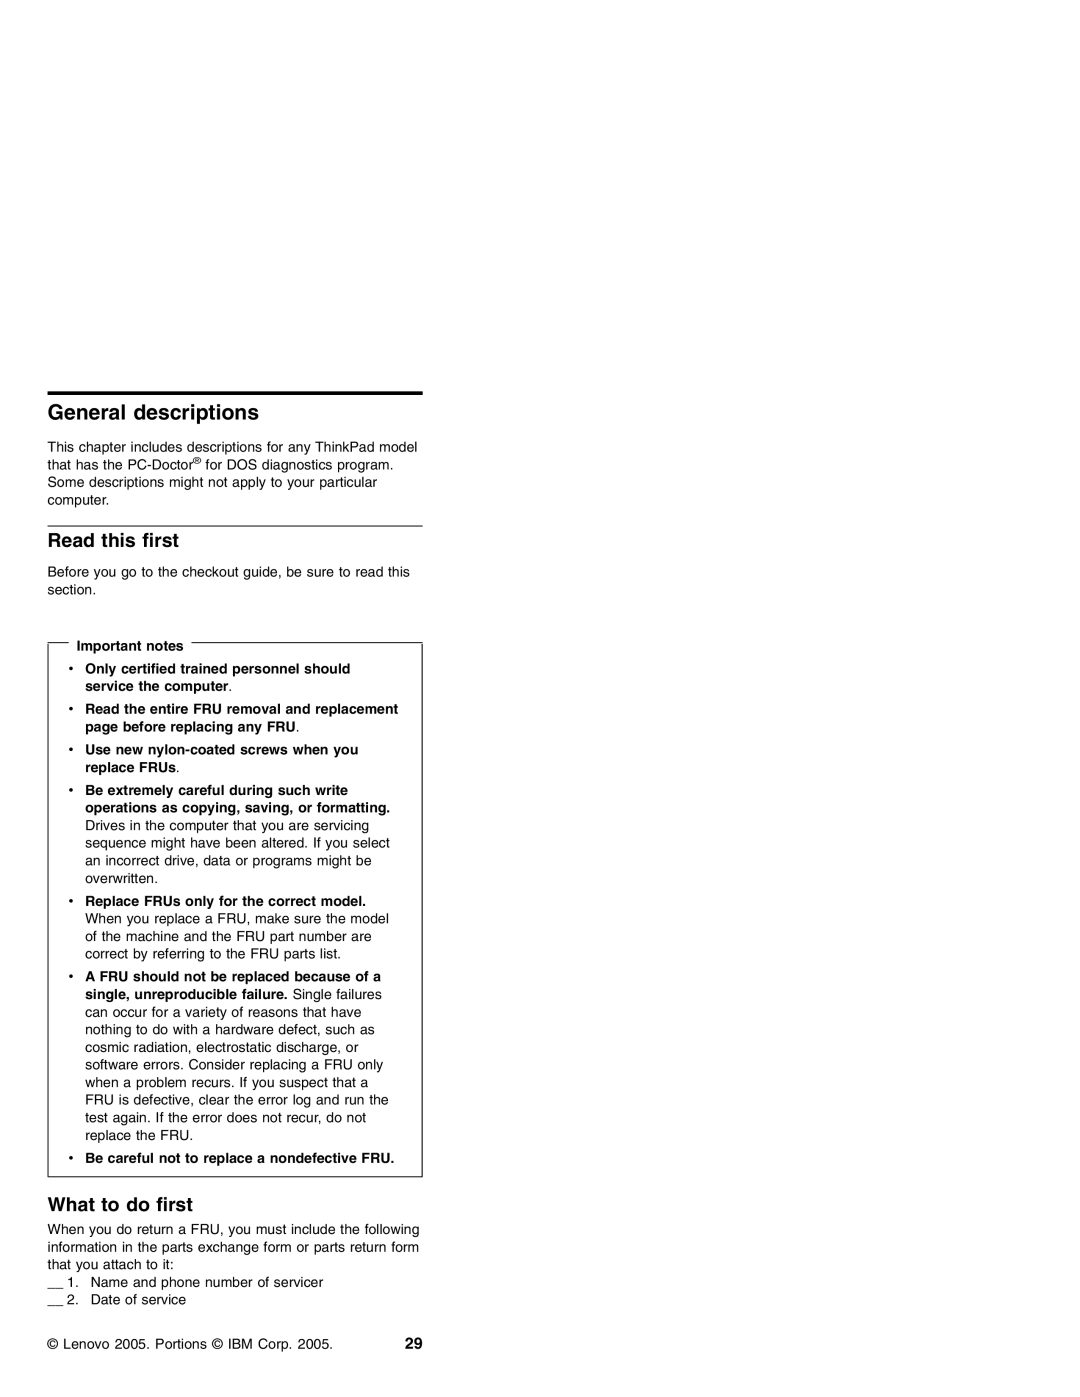 Lenovo MT 2369 manual General descriptions, Read this first, What to do first 